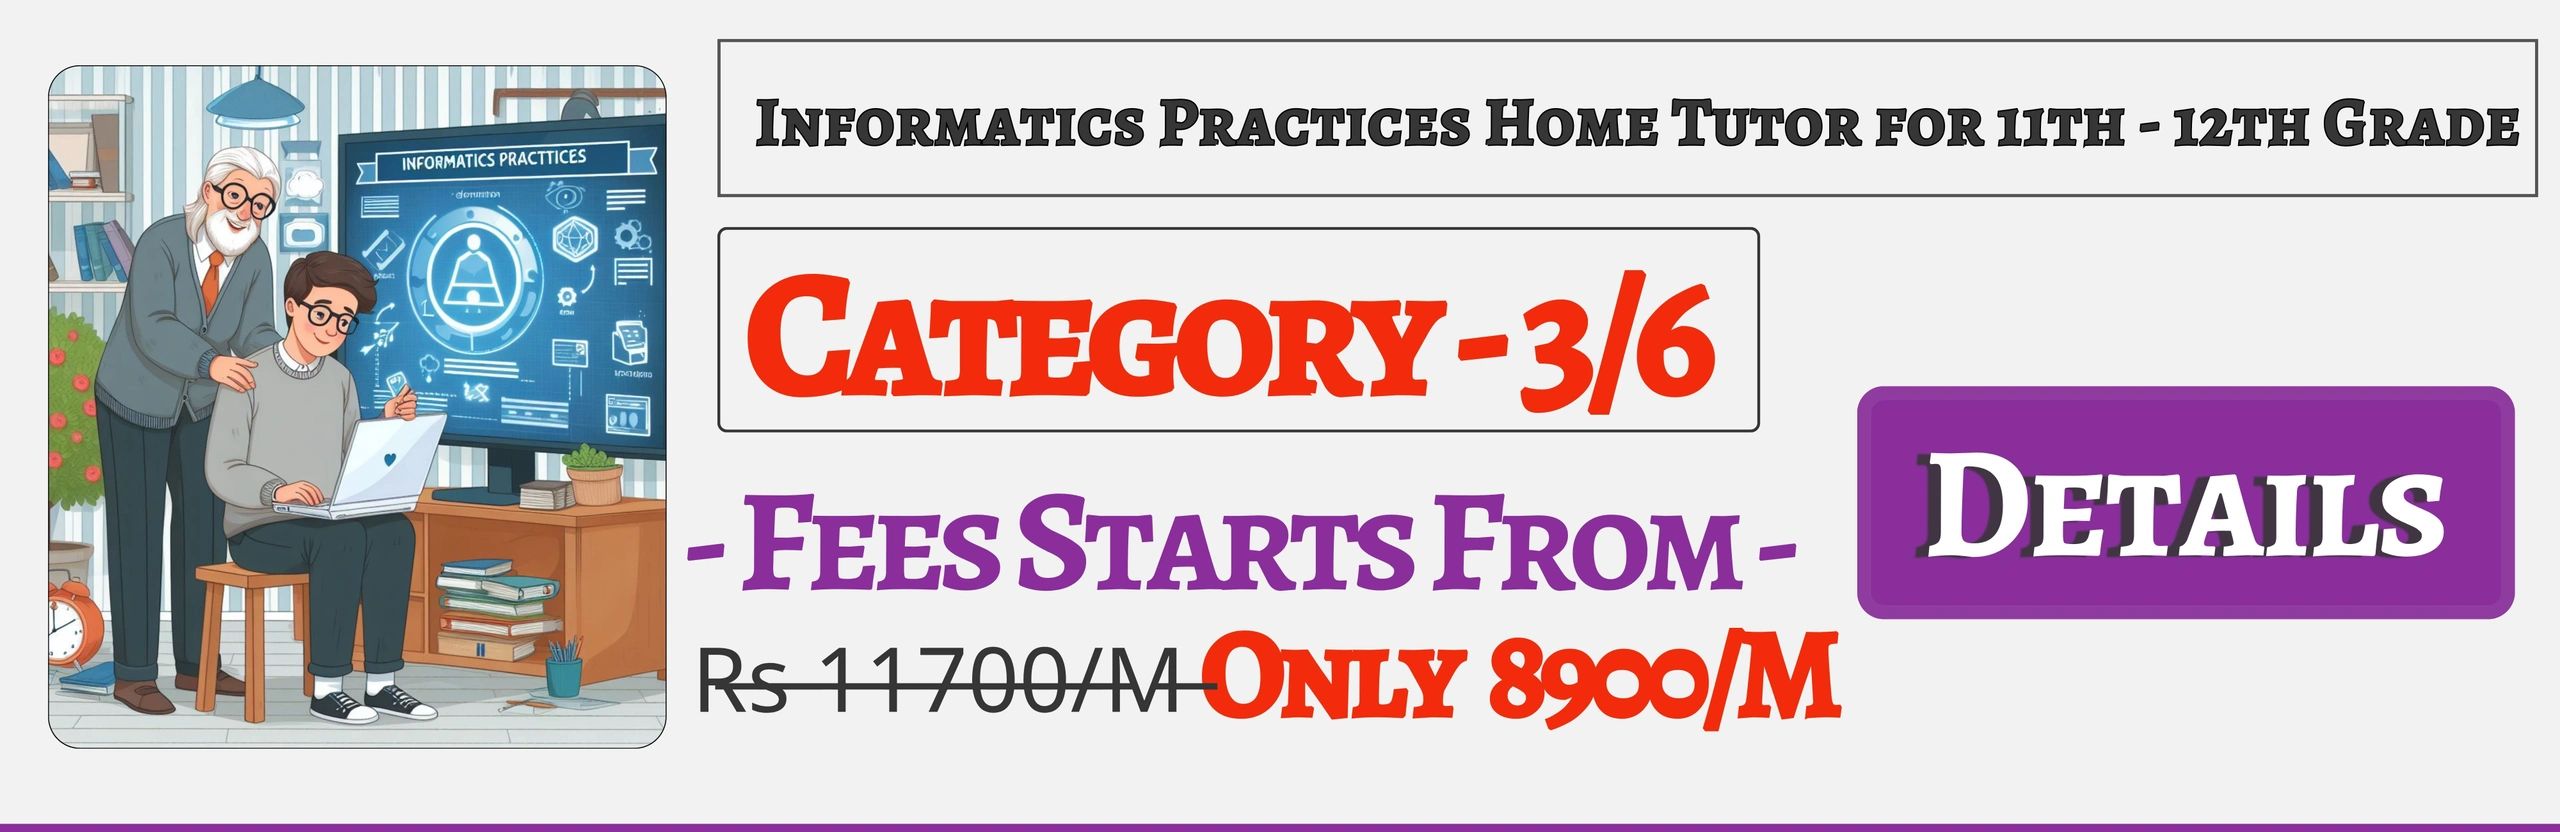 Book Best Nearby Informatics Practices Home Tuition Tutors For 11th & 12th Jaipur ,Fees Only 8900/M